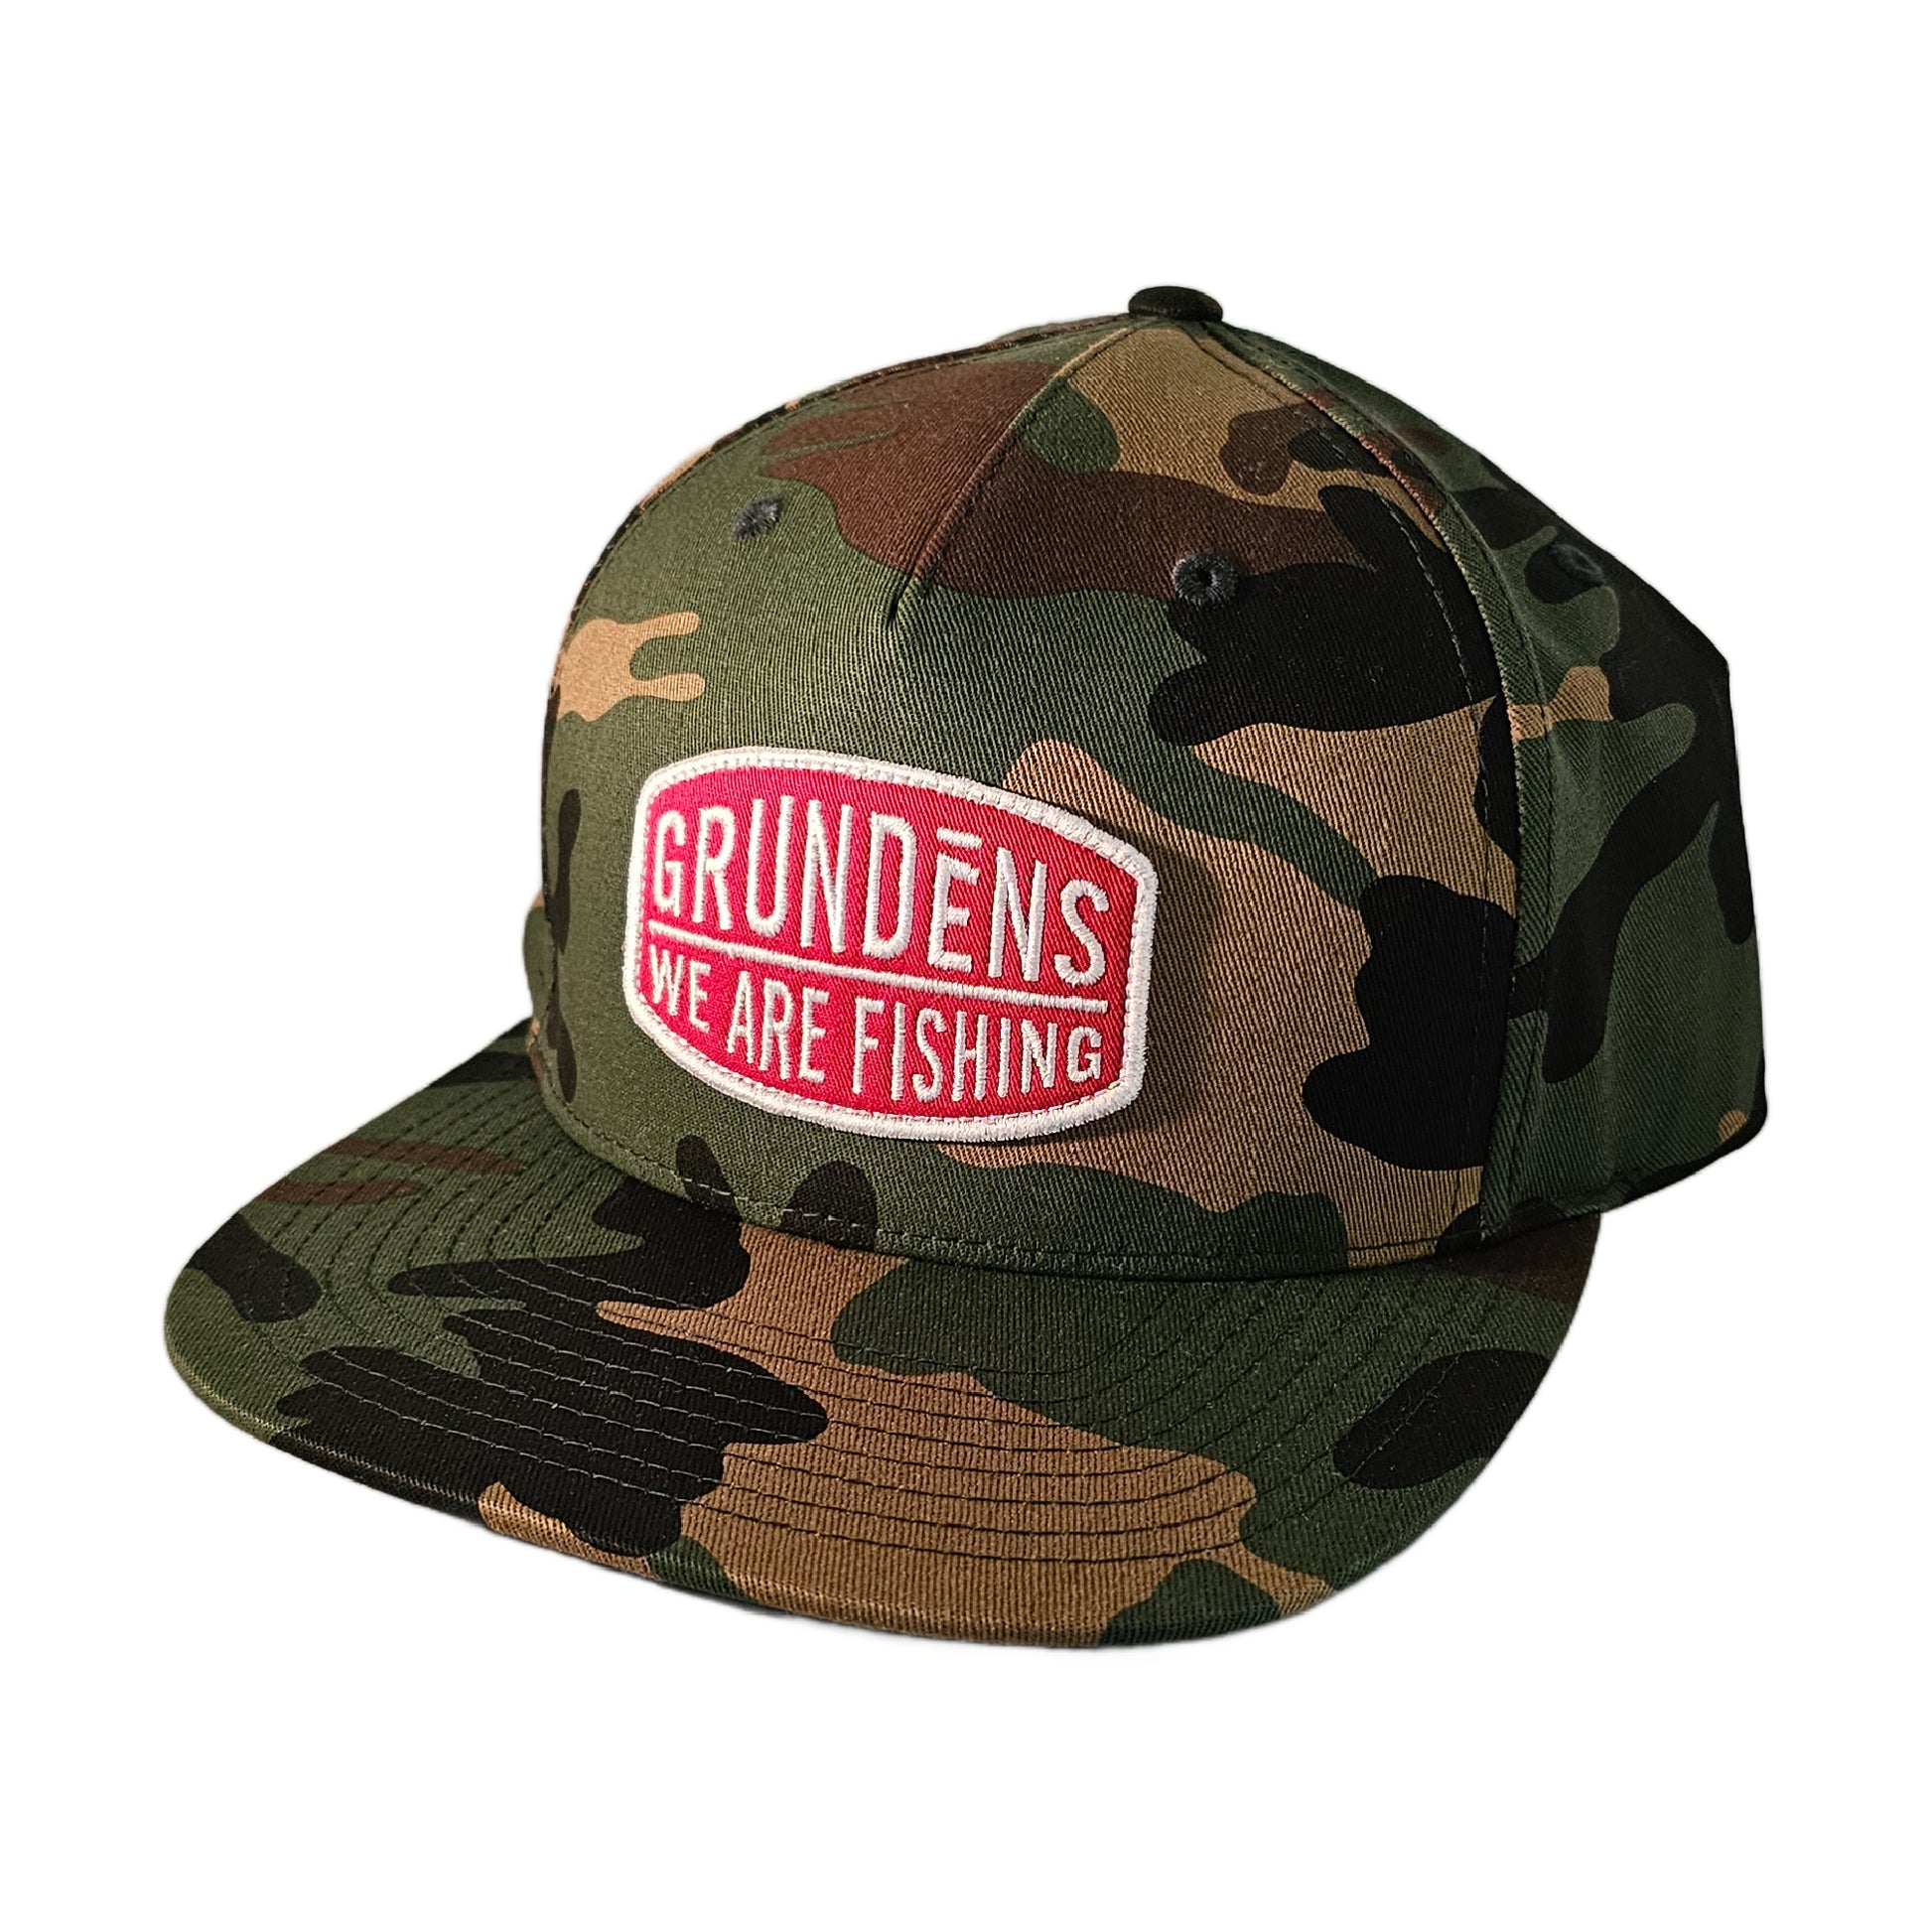 Grundens We Are Fishing Camo Hat